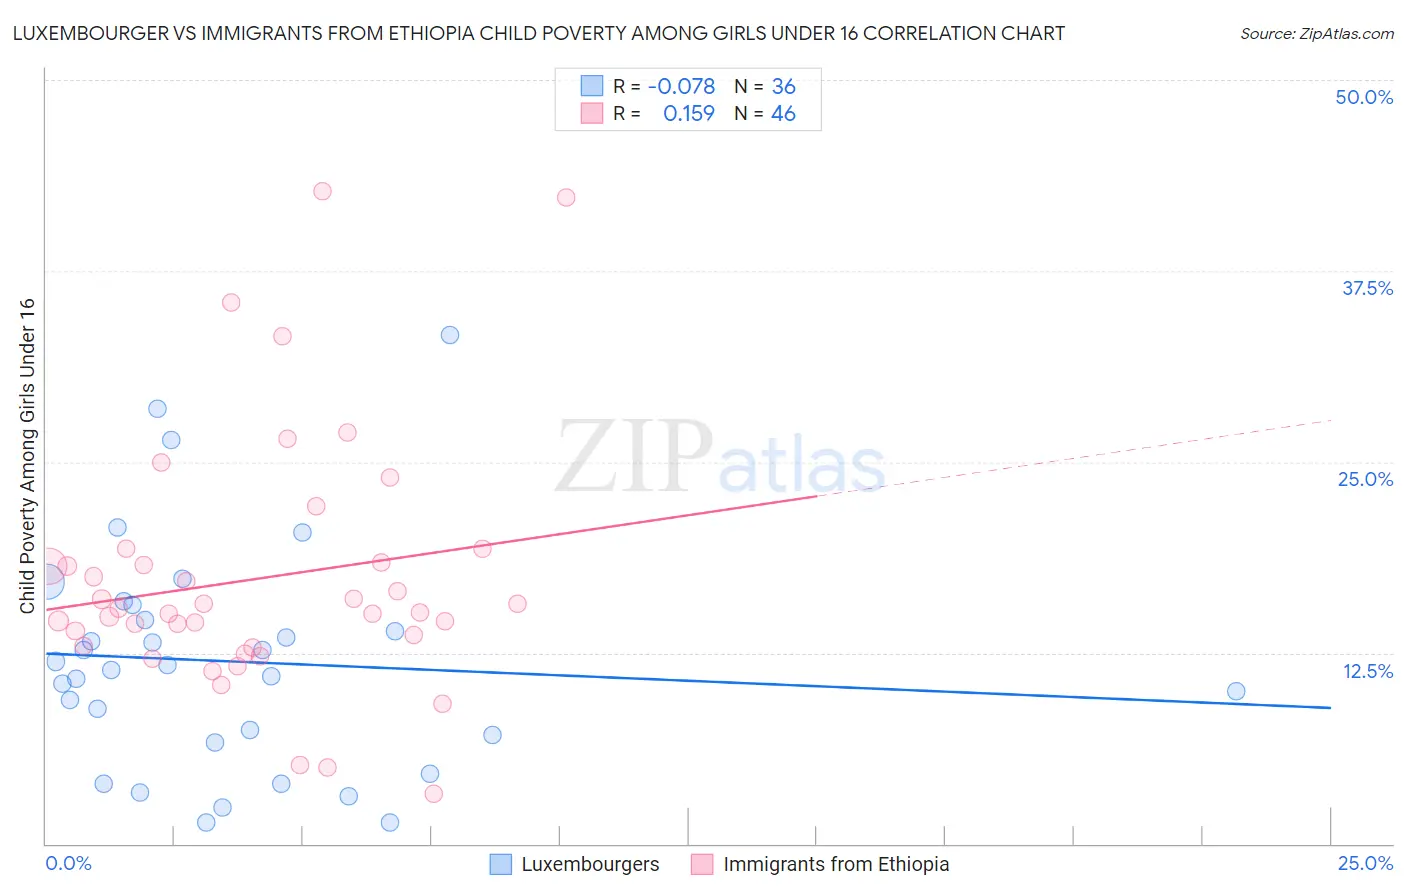 Luxembourger vs Immigrants from Ethiopia Child Poverty Among Girls Under 16